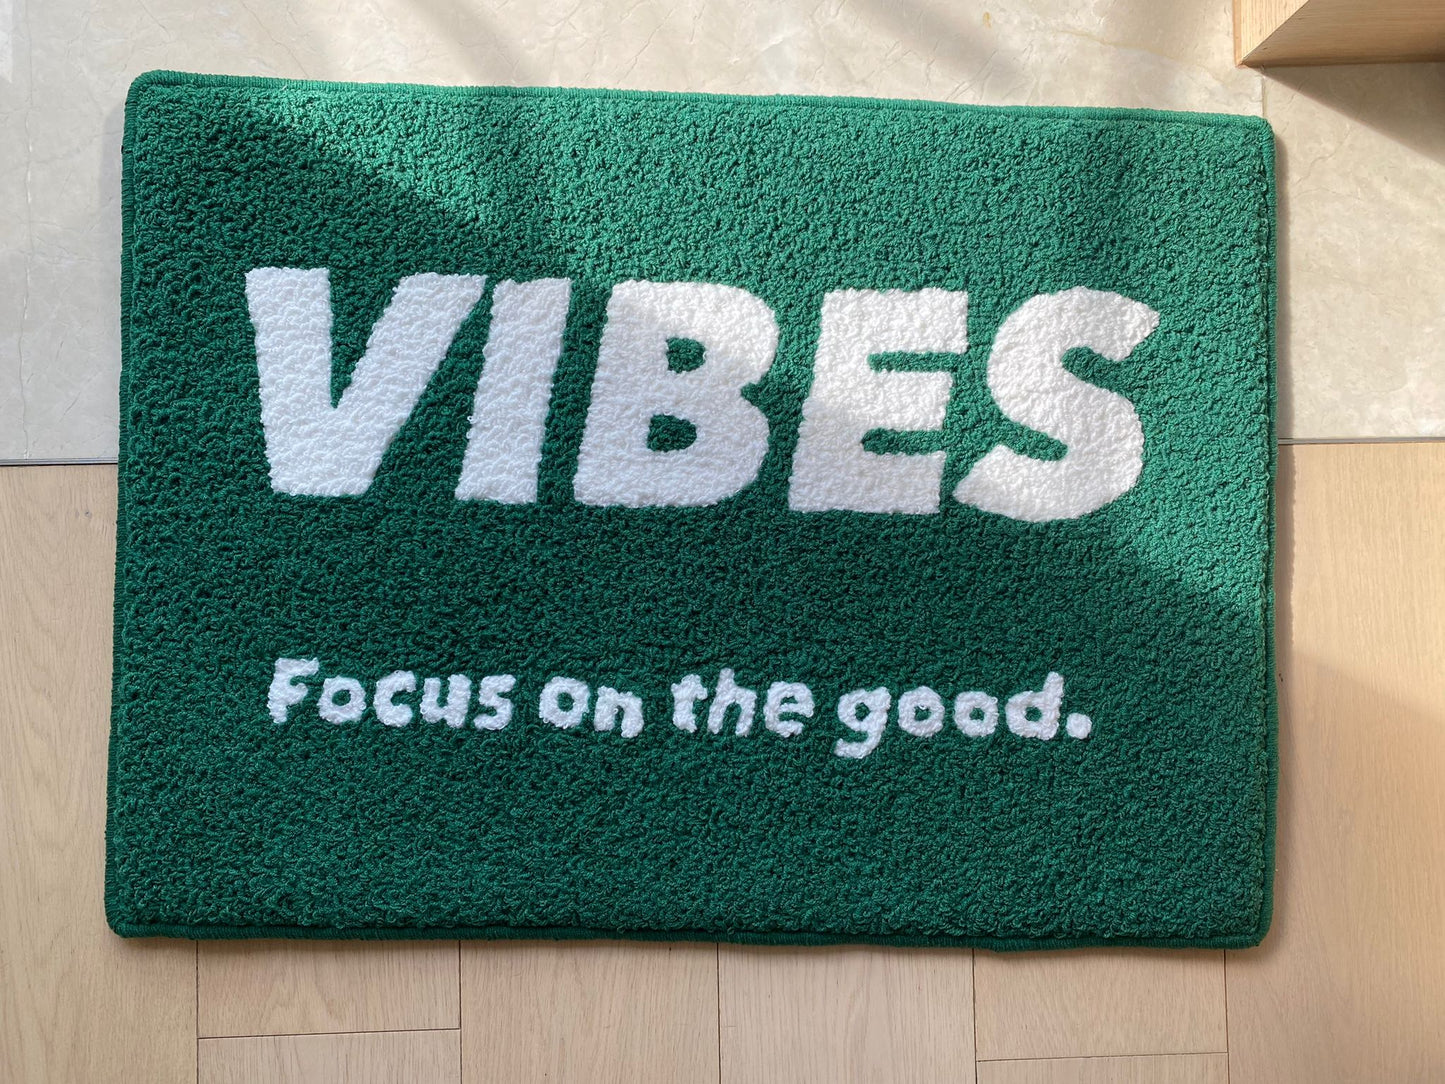 Aly Good Vibes - "Focus On the Good" CARPET